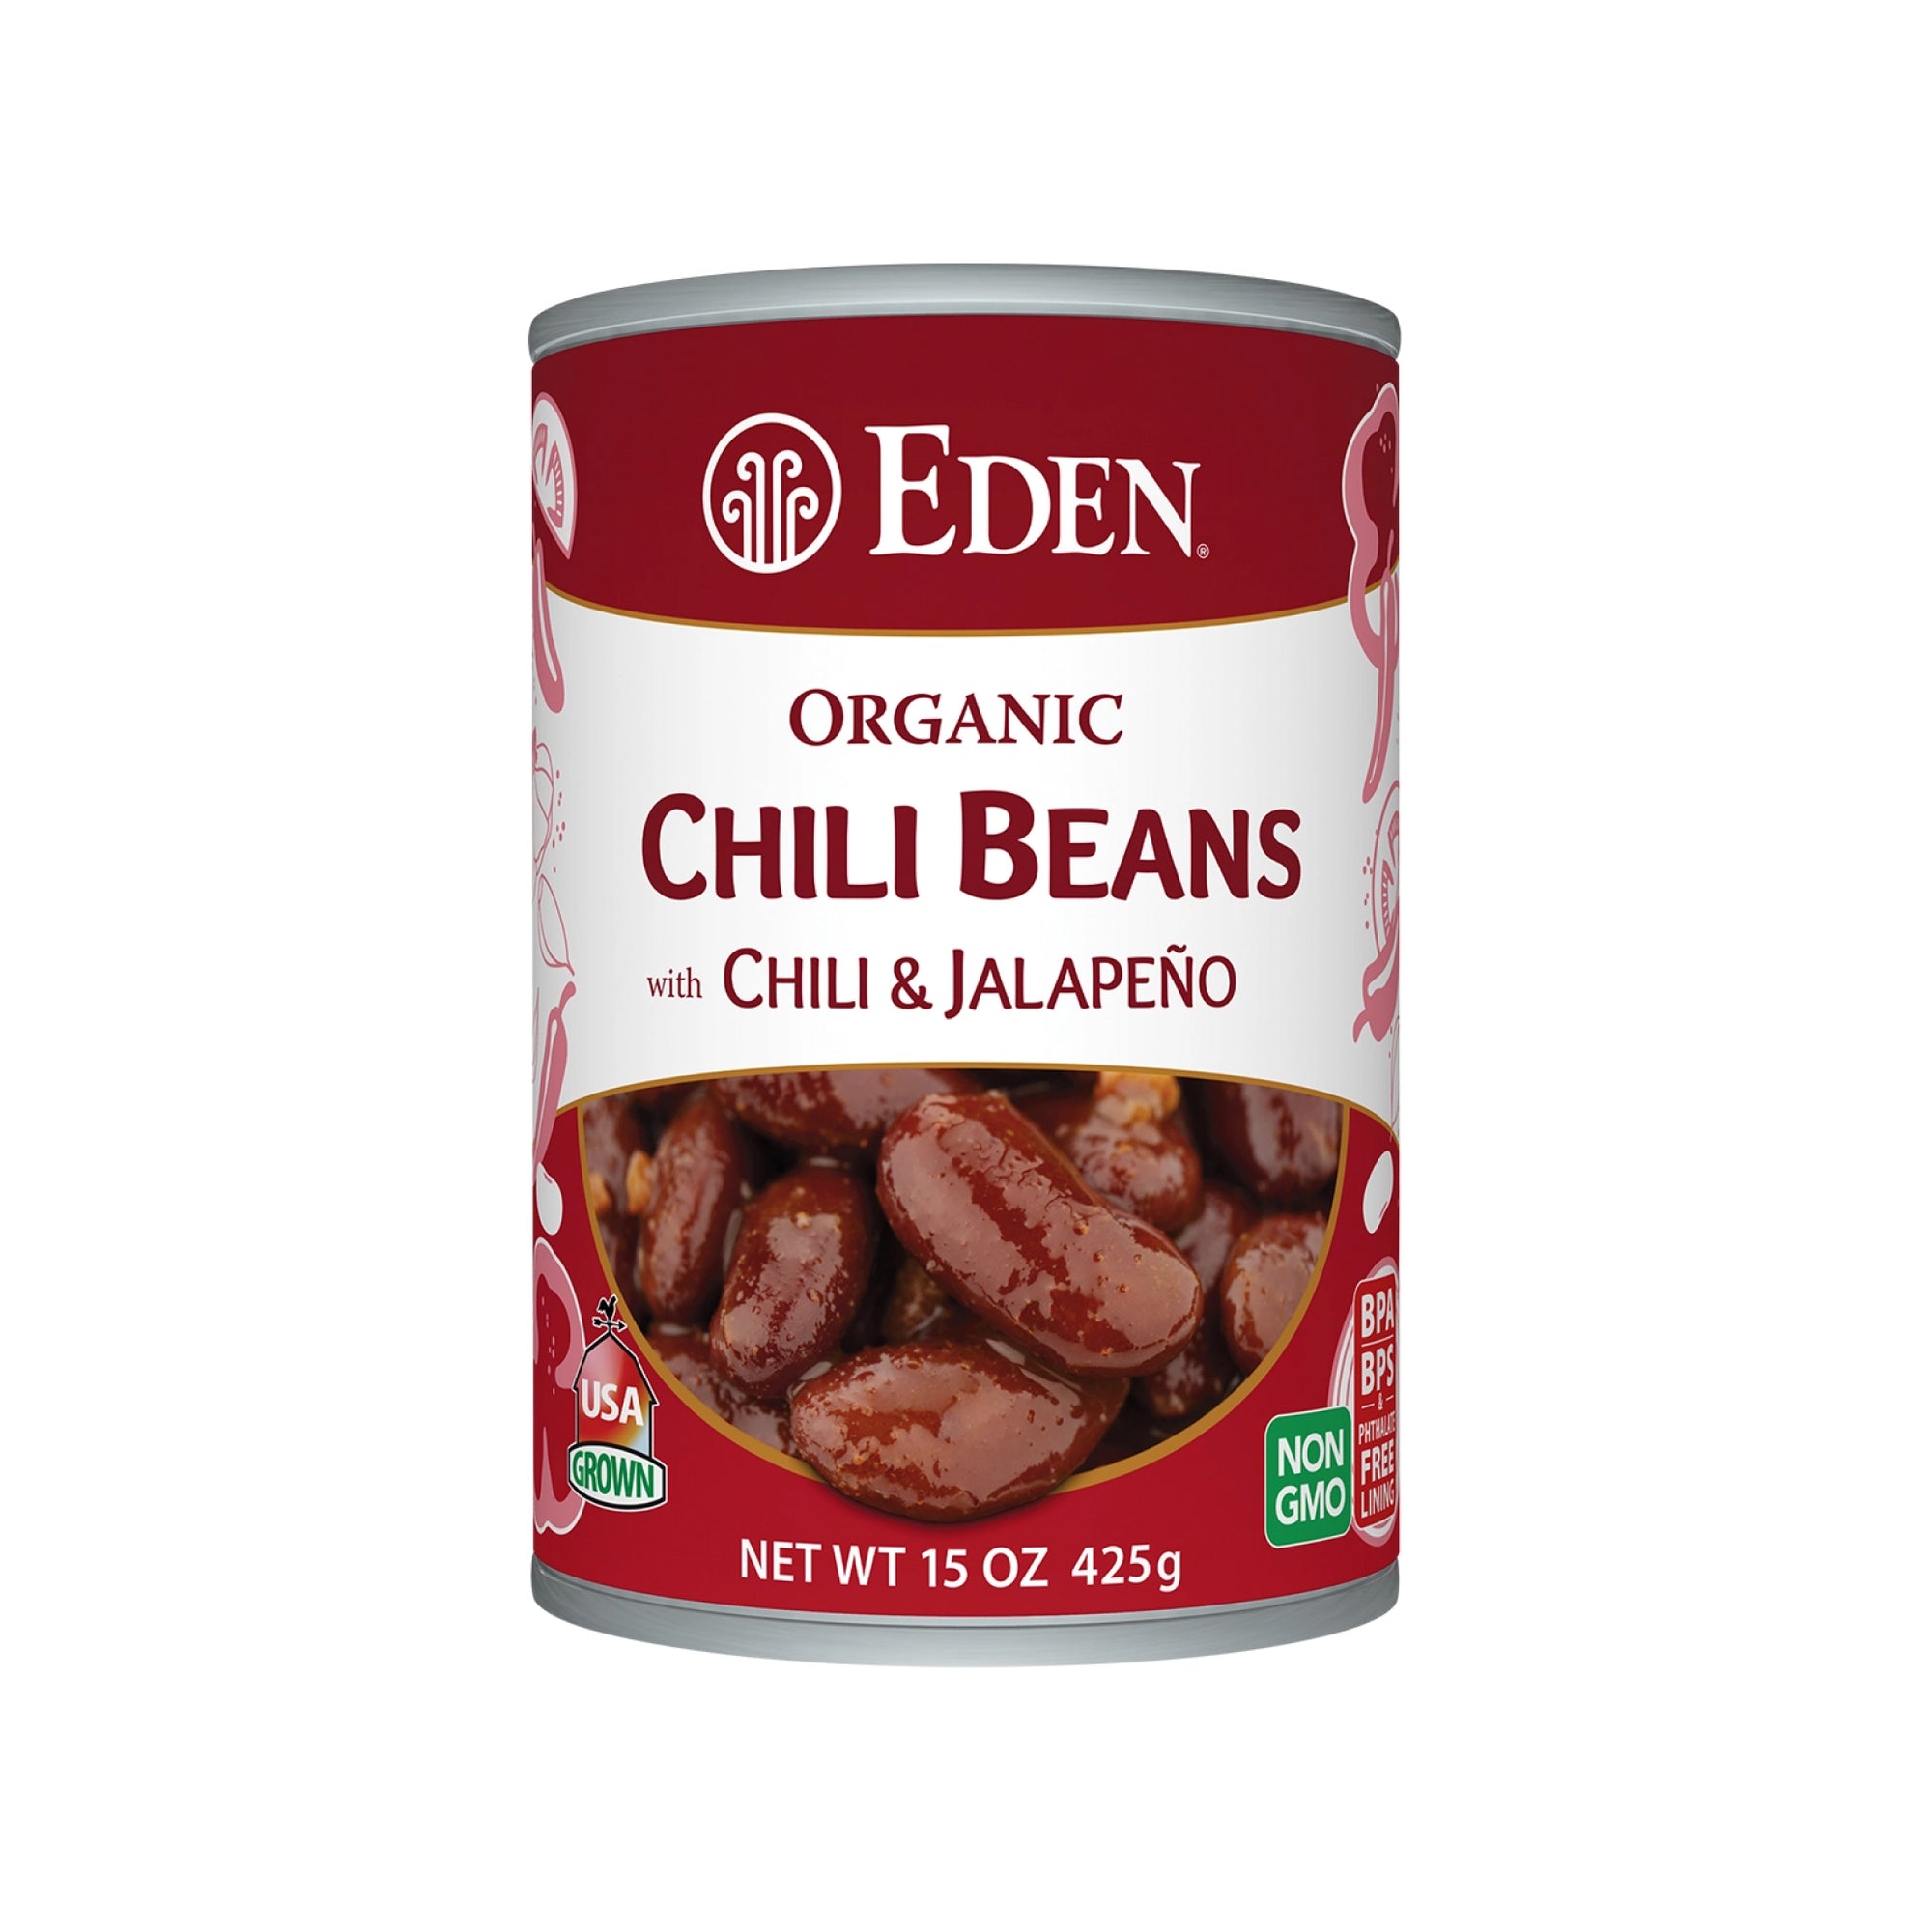 Eden Chili Beans with Jalapeno & Chili Peppers 398ml